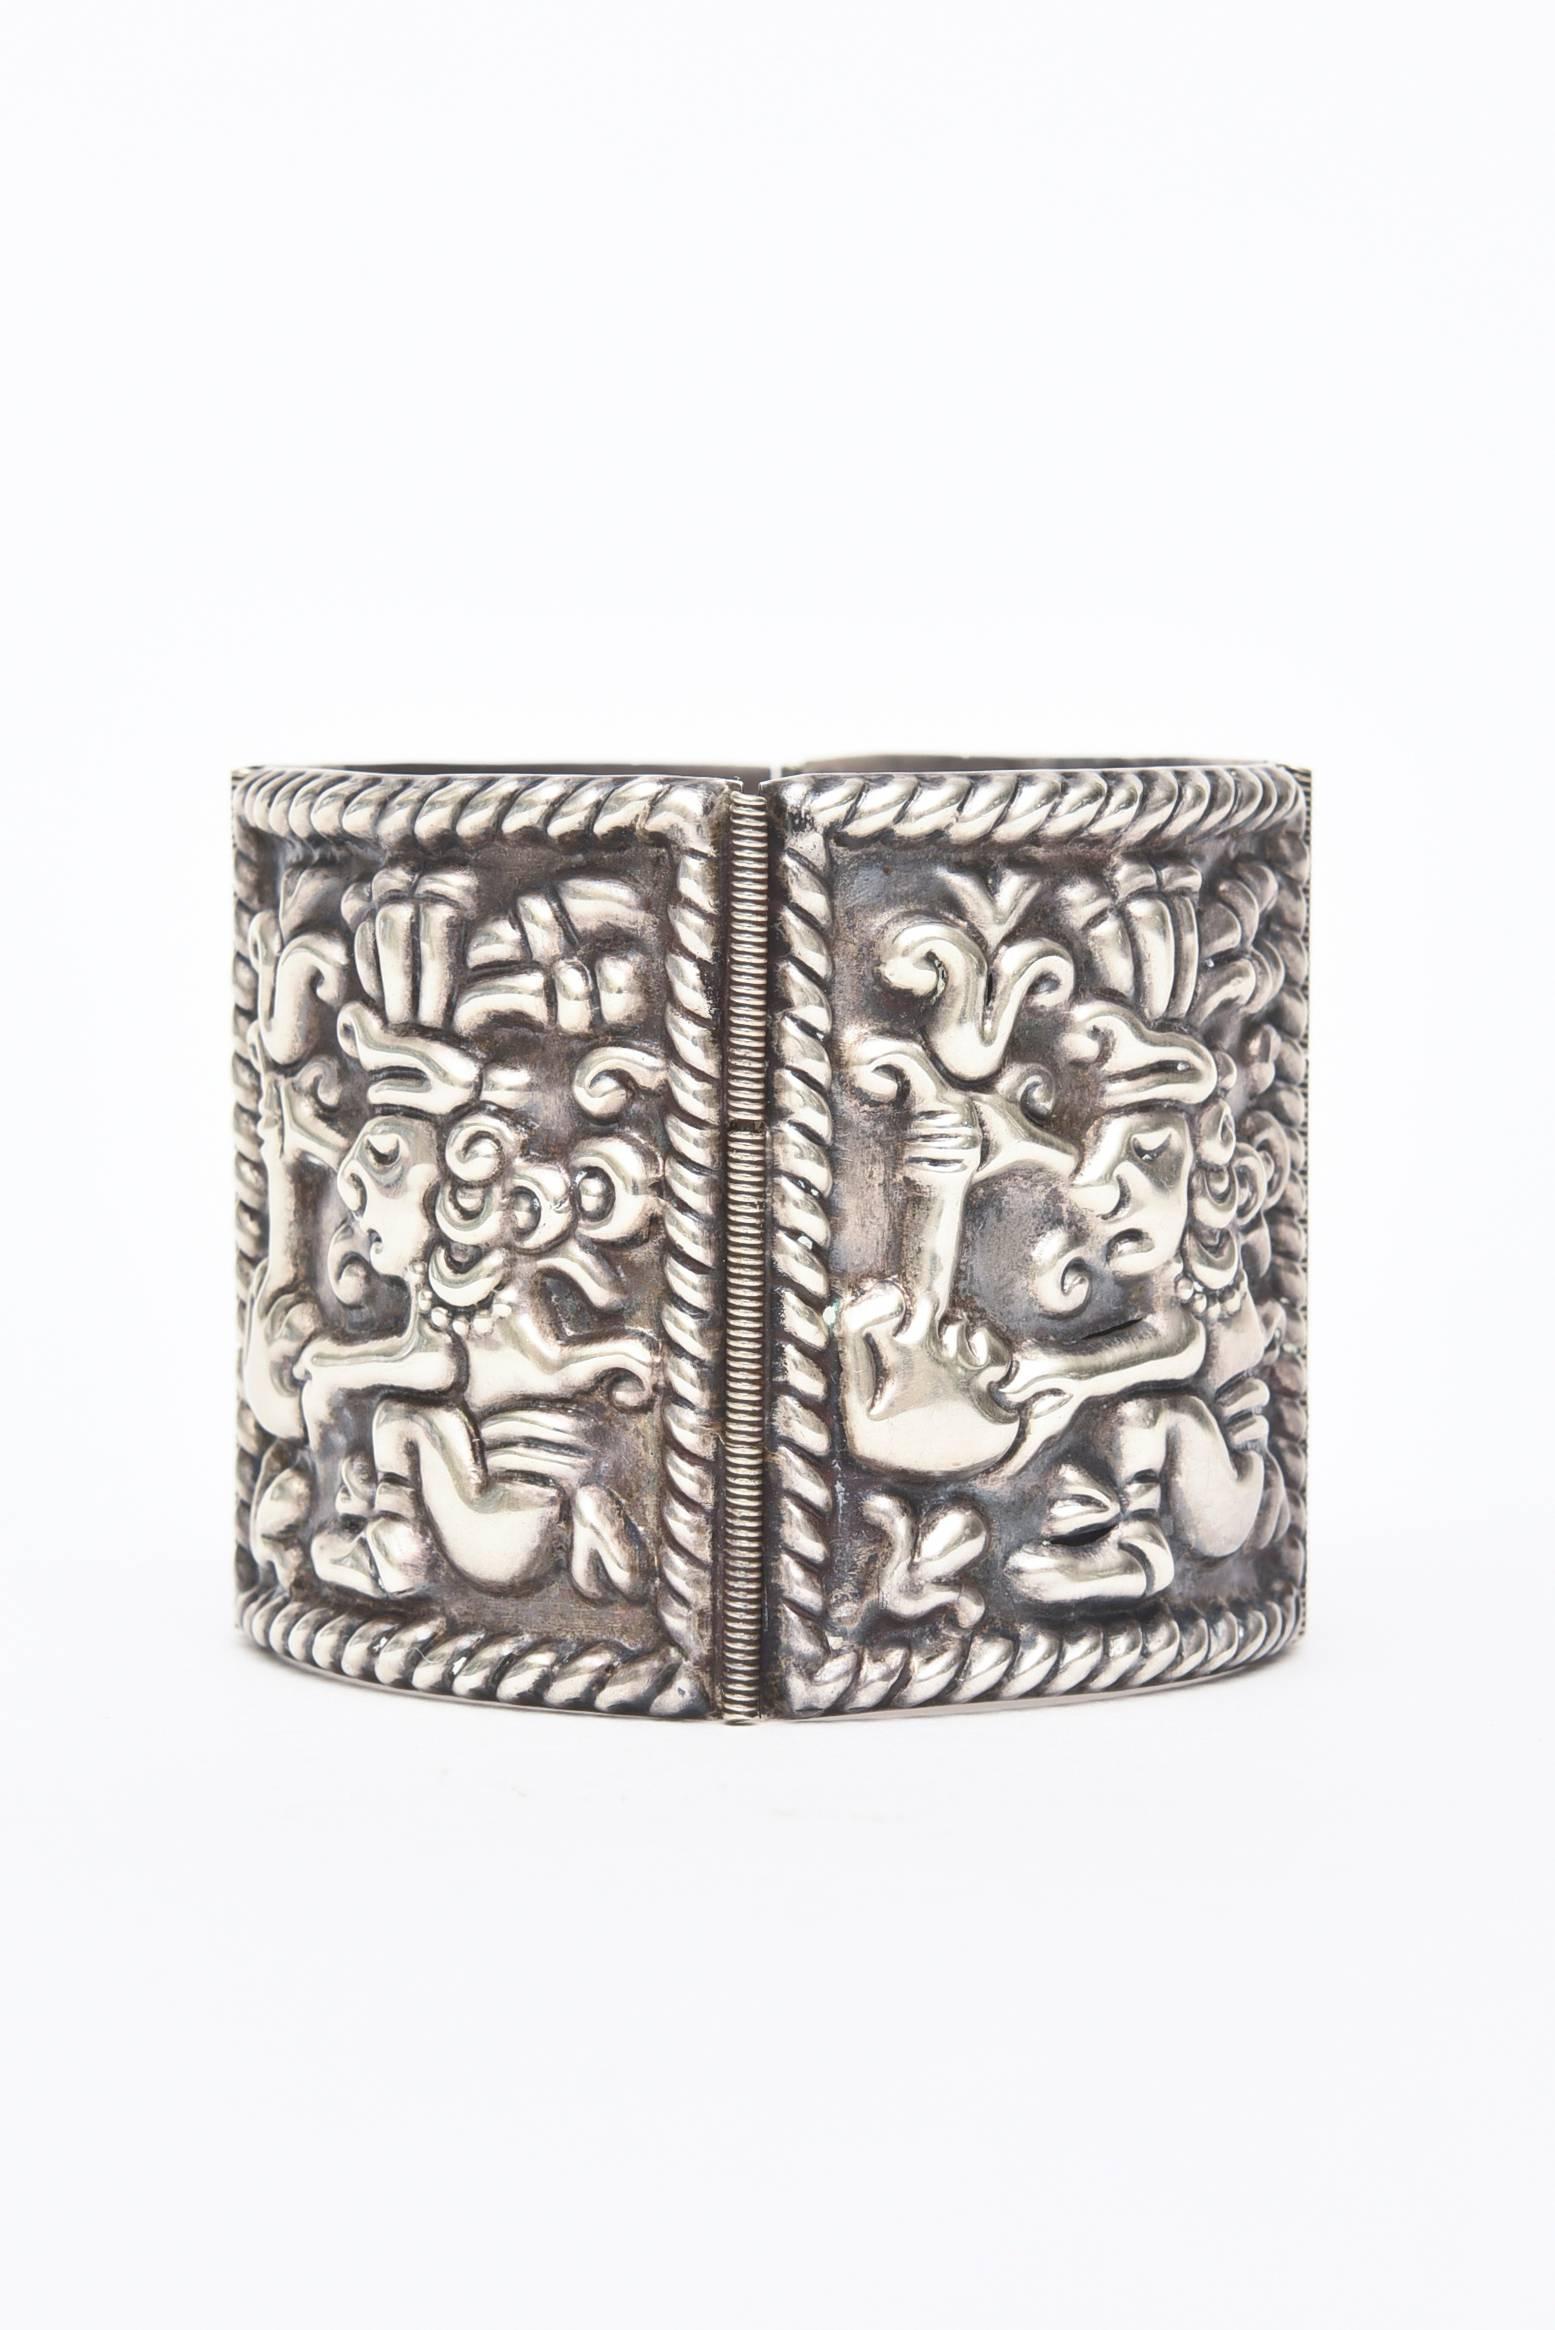 This symbolic sterling silver cuff bracelet is signed with lots of hallmarks. It is hallmarked Hencho en Mexico 0925 with initials and symbols. This is an early piece from the 40's or early 50's.
It fits beautifully on the wrist... not heavy not